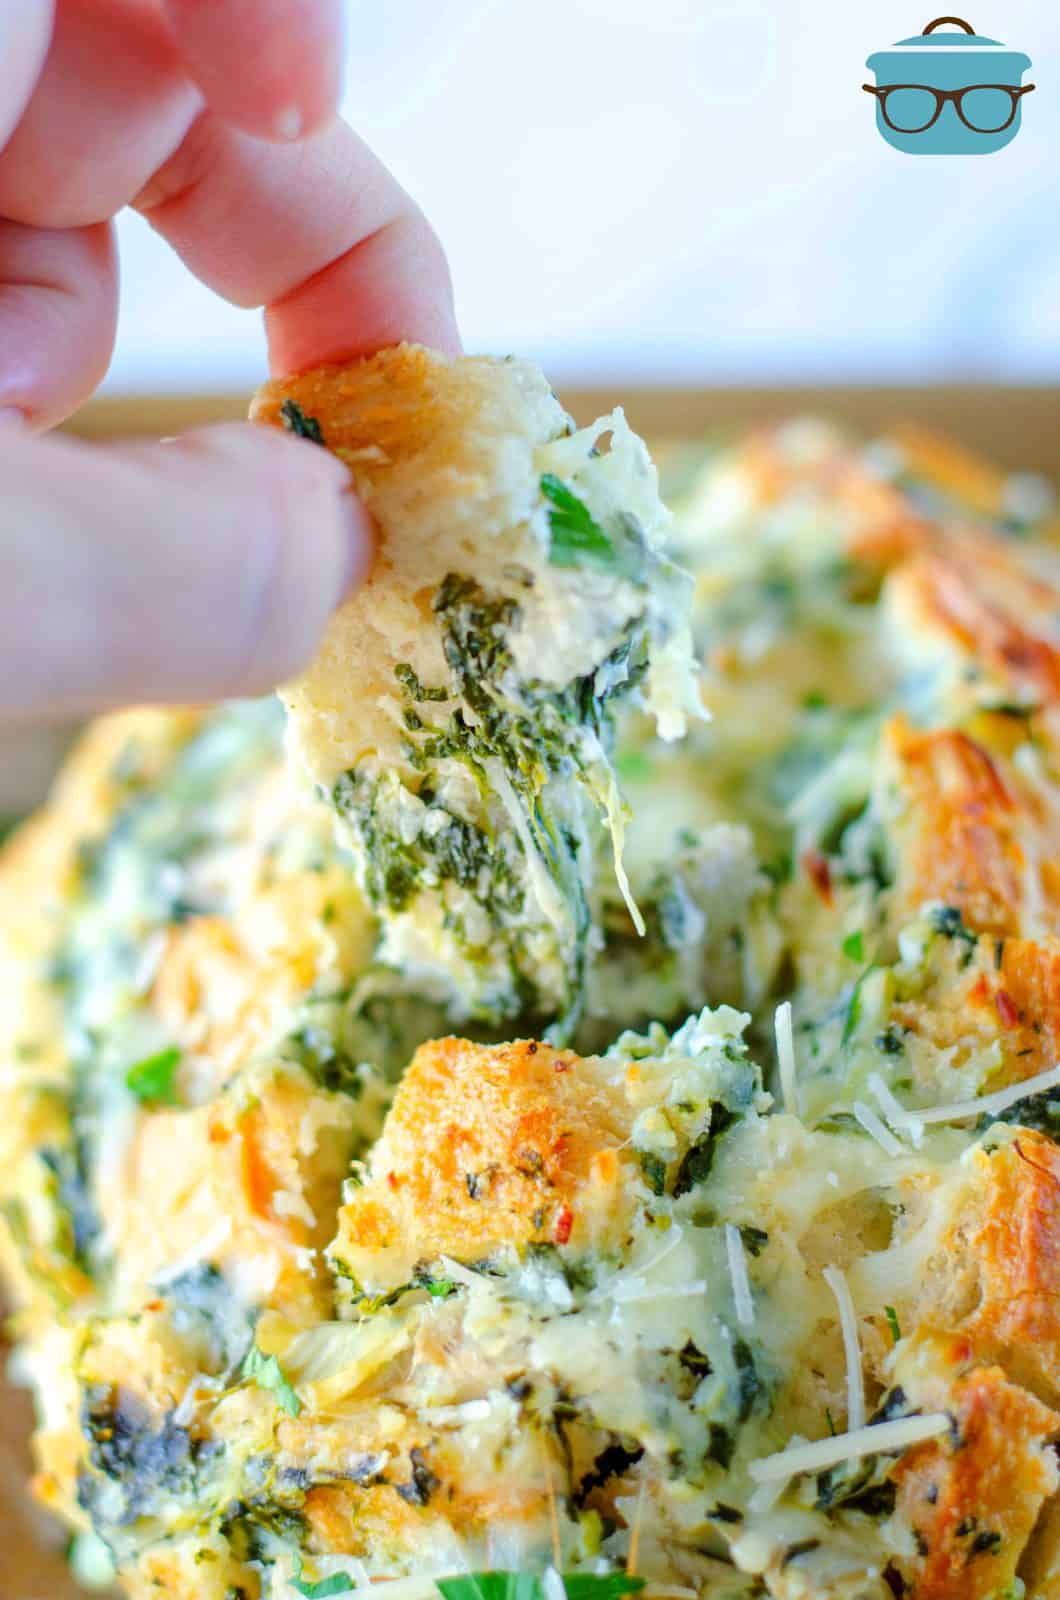 Hand pulling up some of the Spinach Artichoke Pull Apart-Bread.